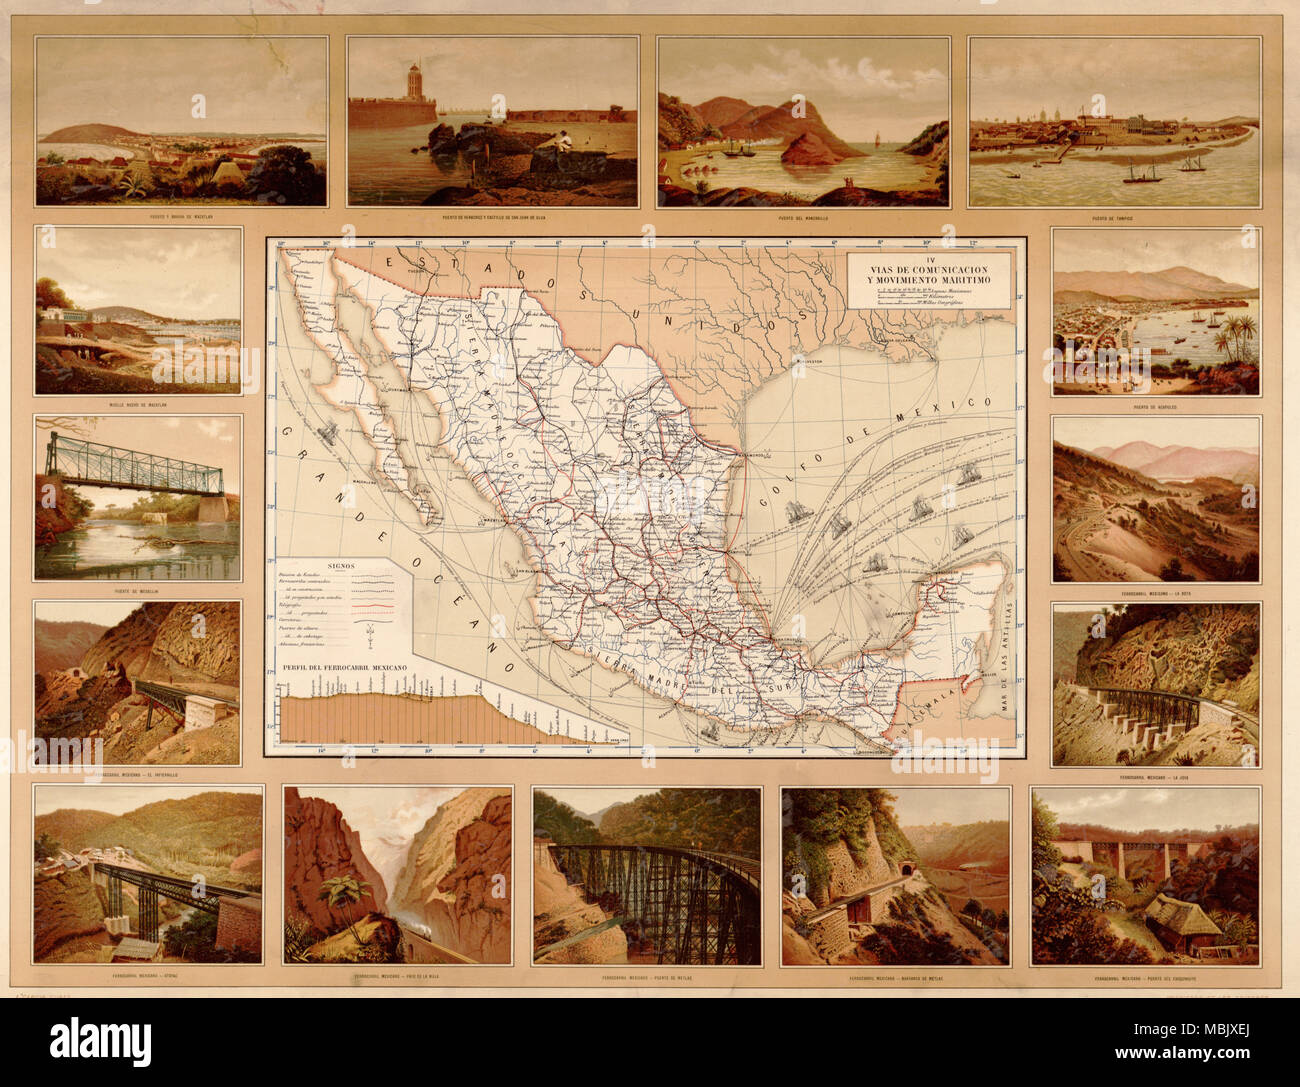 Communications & Maritime Waterways Mexican Map - 1885 Stock Photo